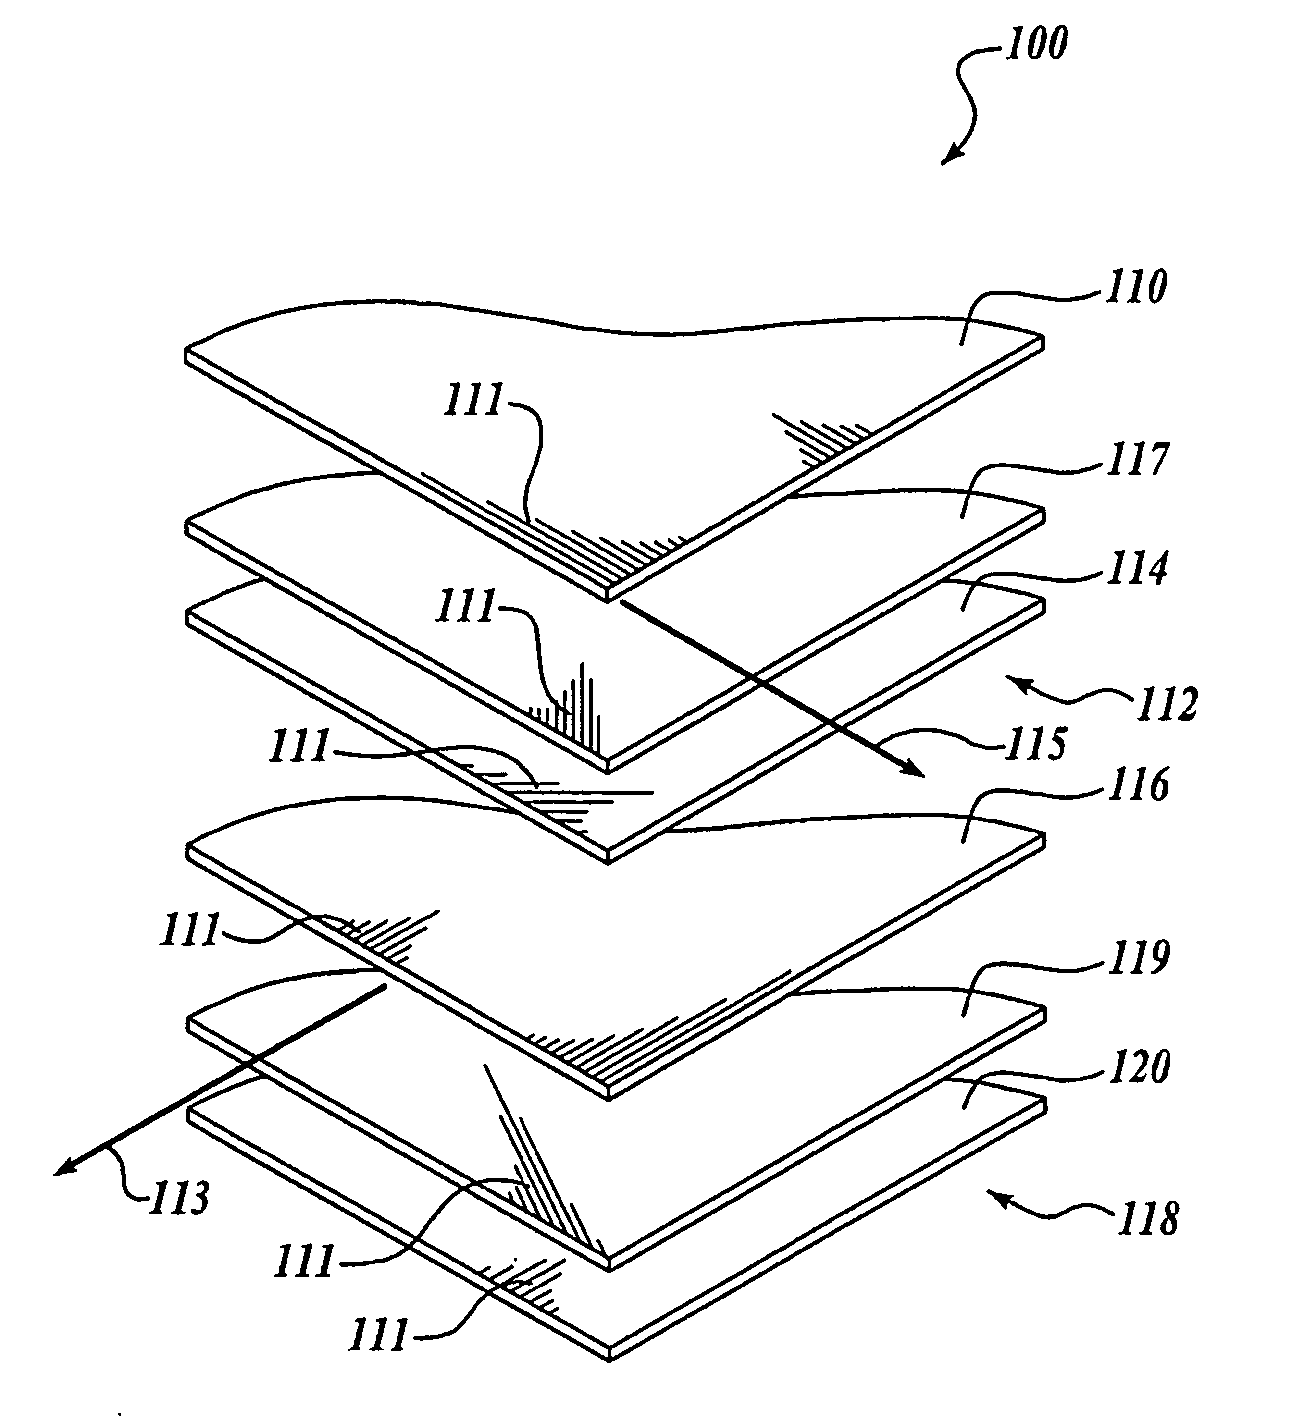 Multi-axial laminate composite structures and methods of forming the same